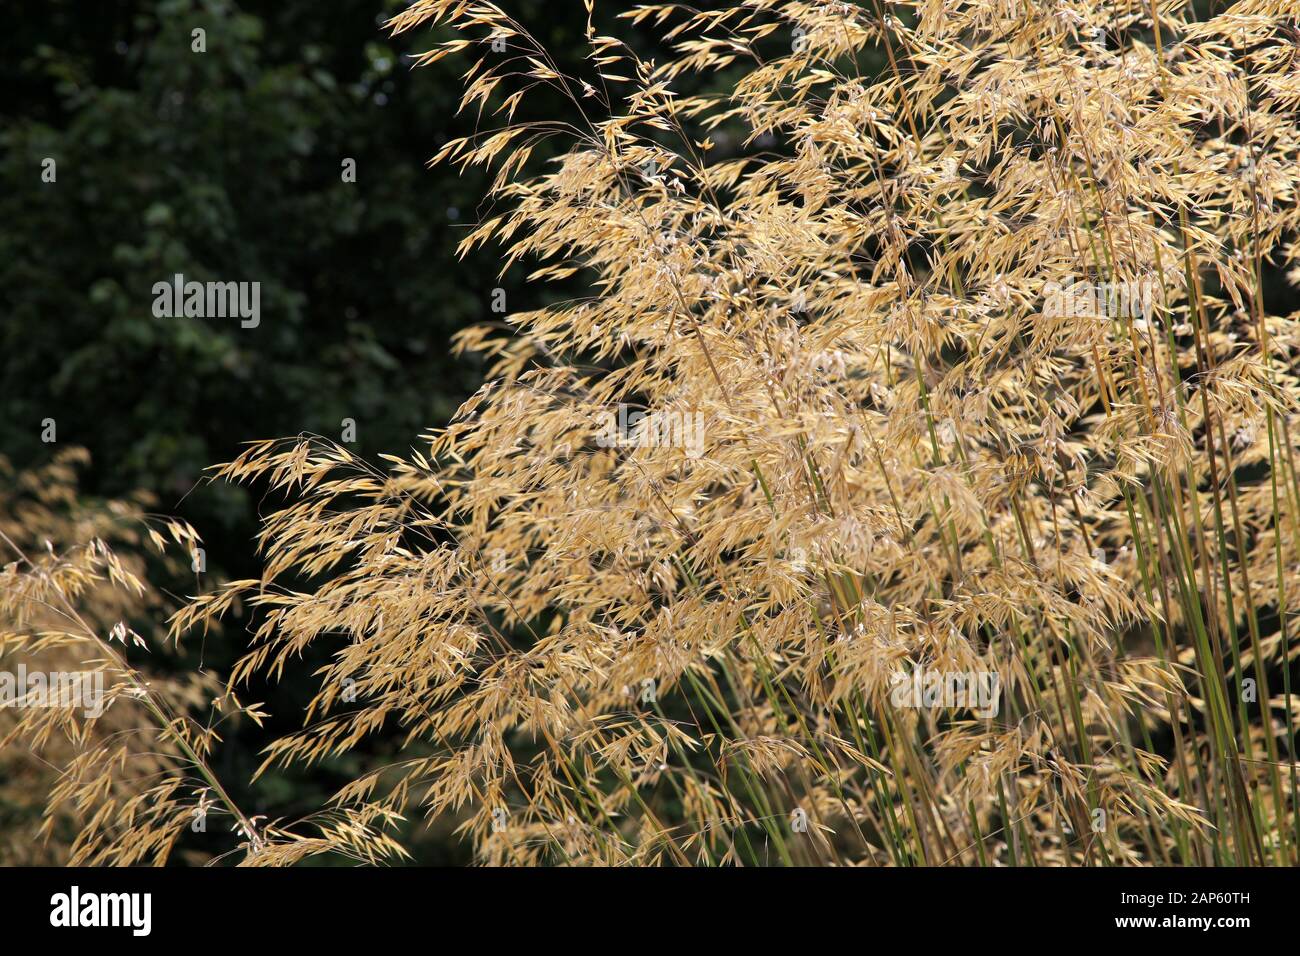 Long grass with seeds Stock Photo